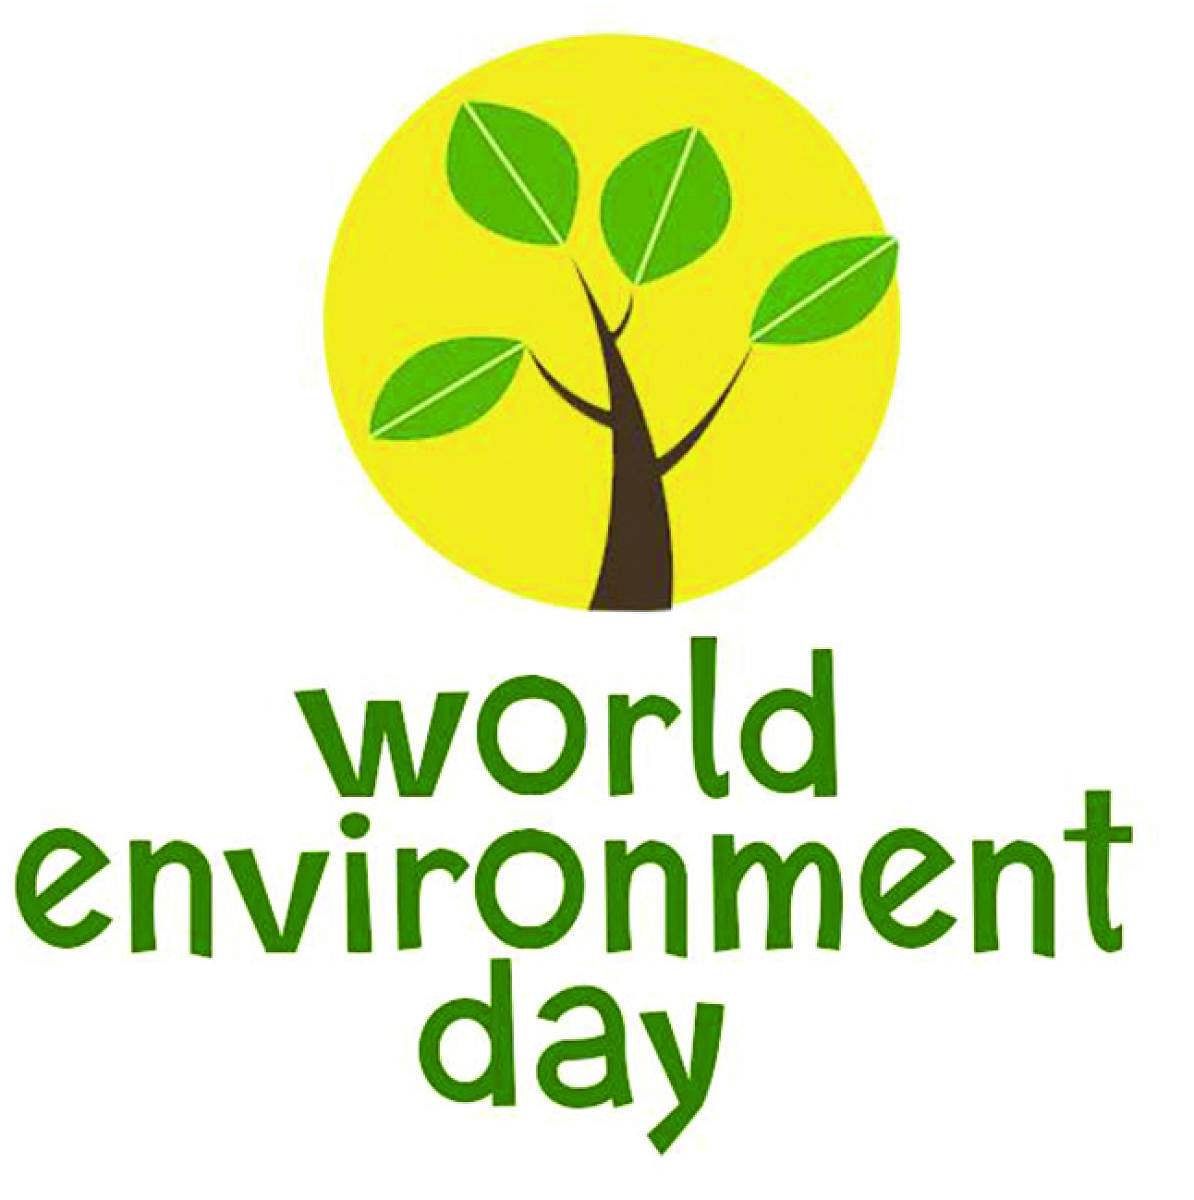 World Environment Day on June 5